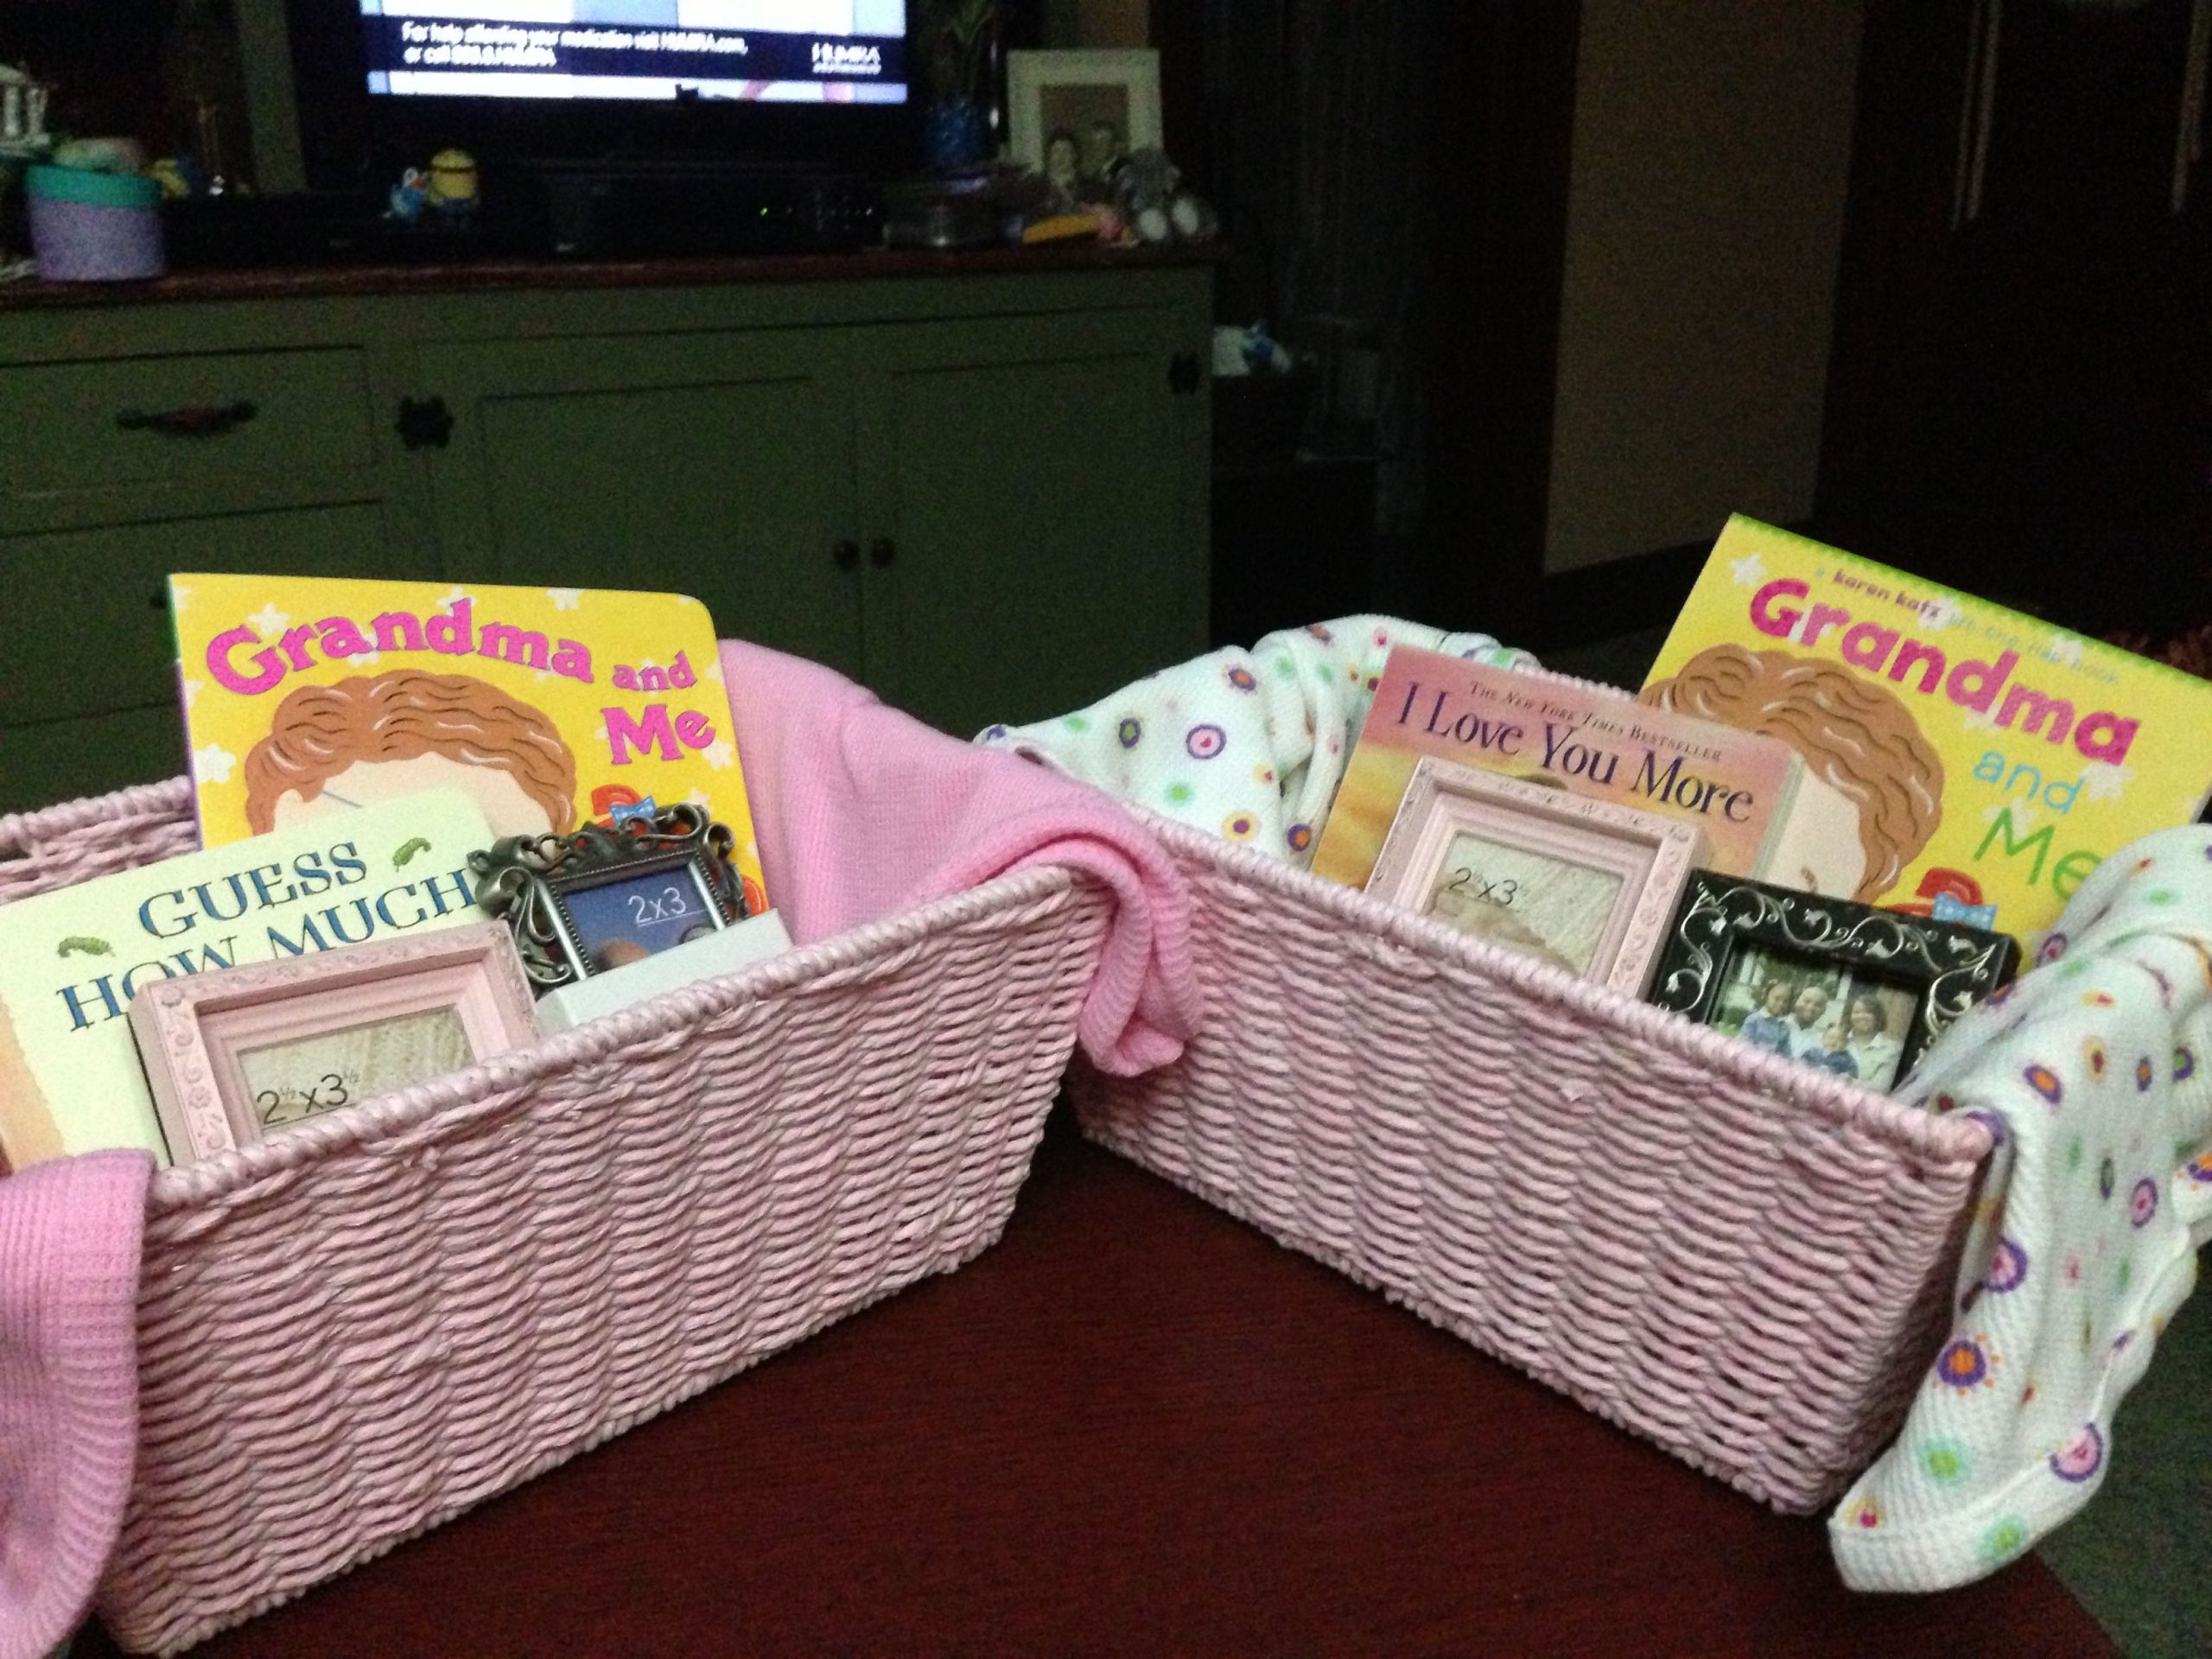 Grandma Baby Shower Gift Ideas
 Grandmother baskets for a baby shower